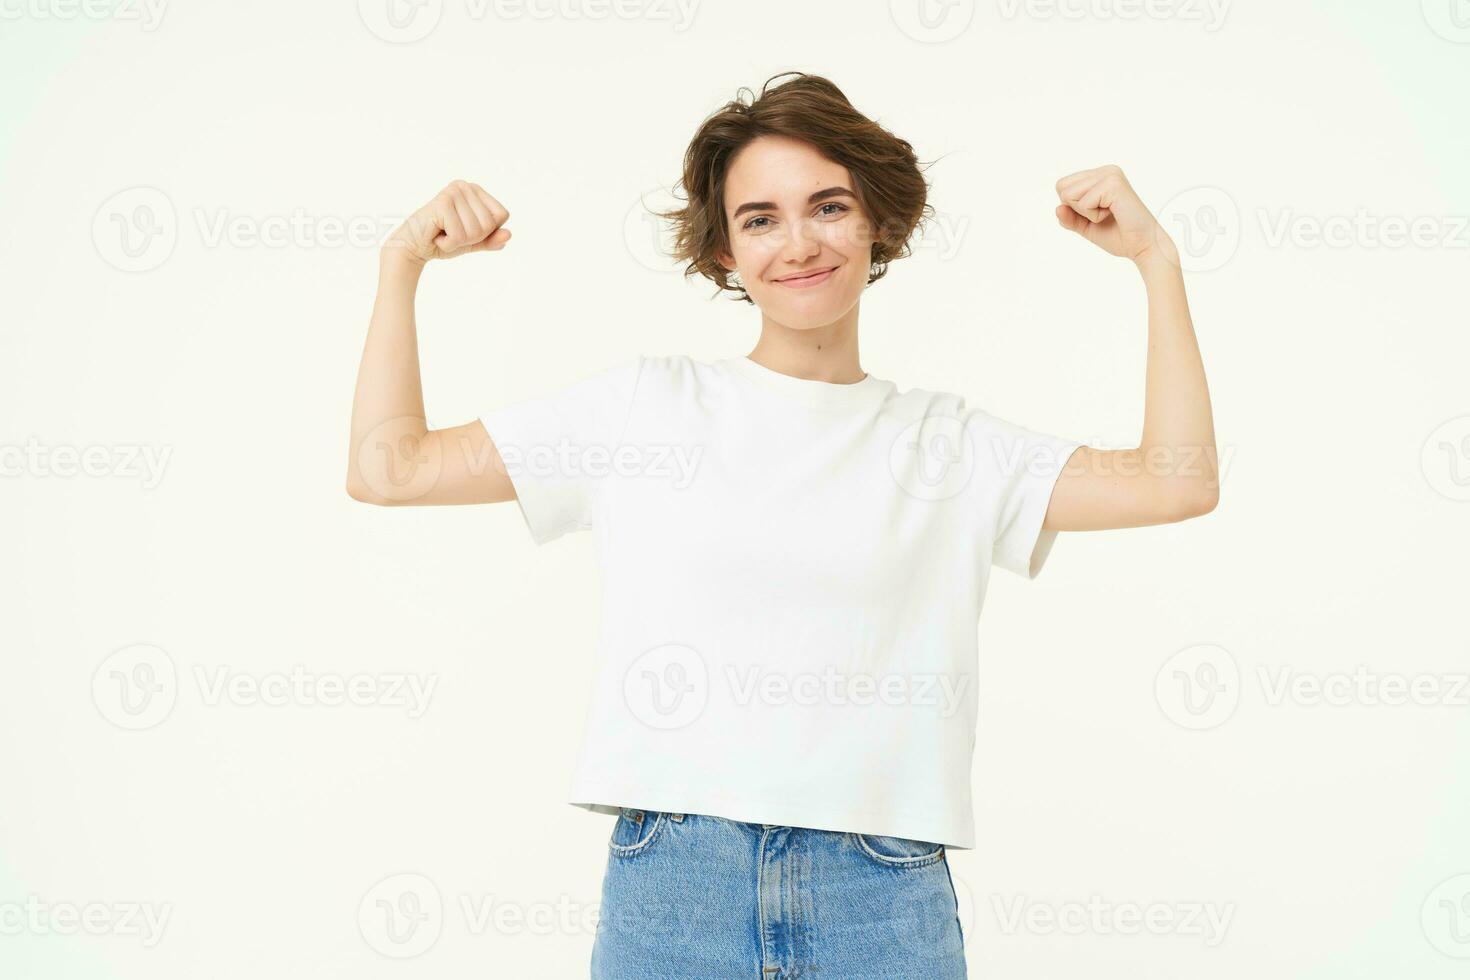 Portrait of confident and strong young woman, flexing biceps, shows her muscles on arms with proud smiling face, posing over white background photo